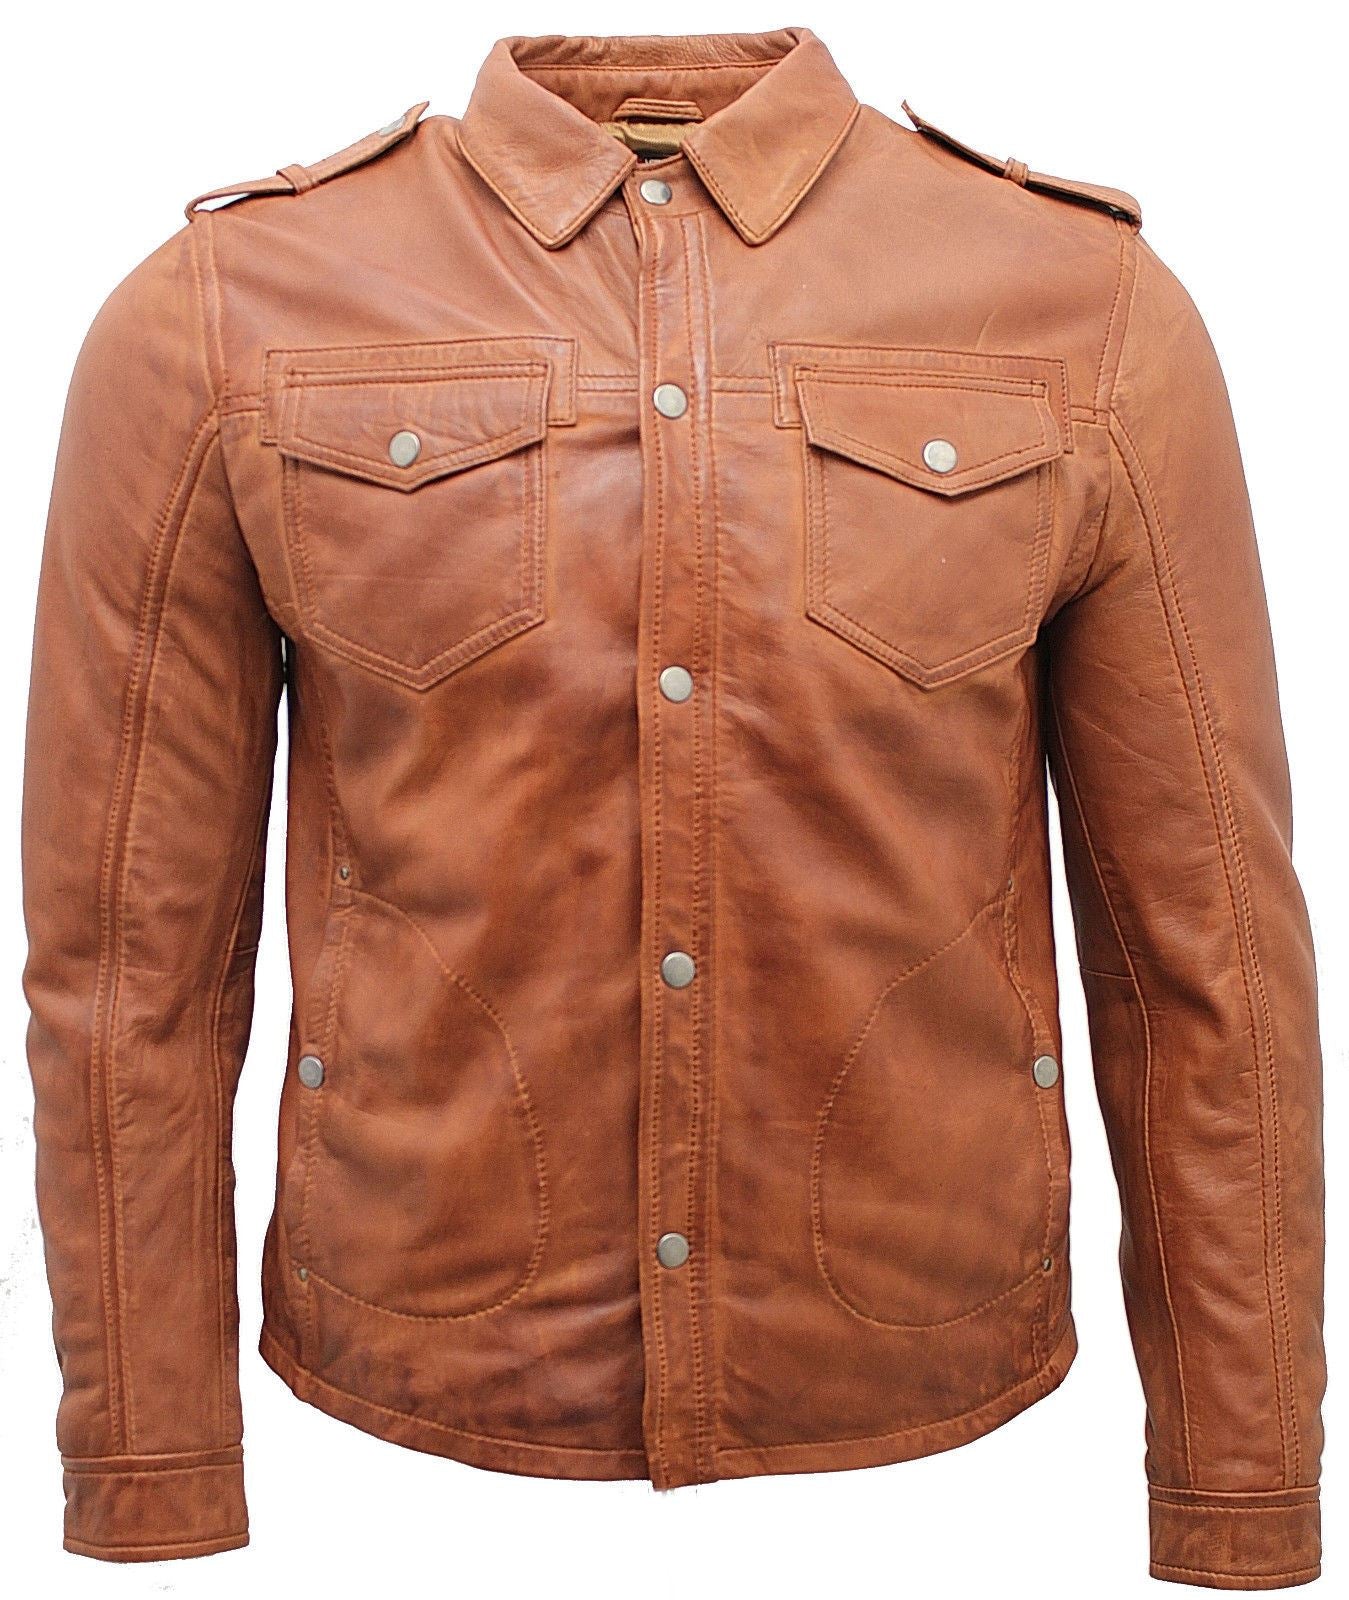 Mens Leather Jeans Style Shirt Jacket-Dawley - Upperclass Fashions 